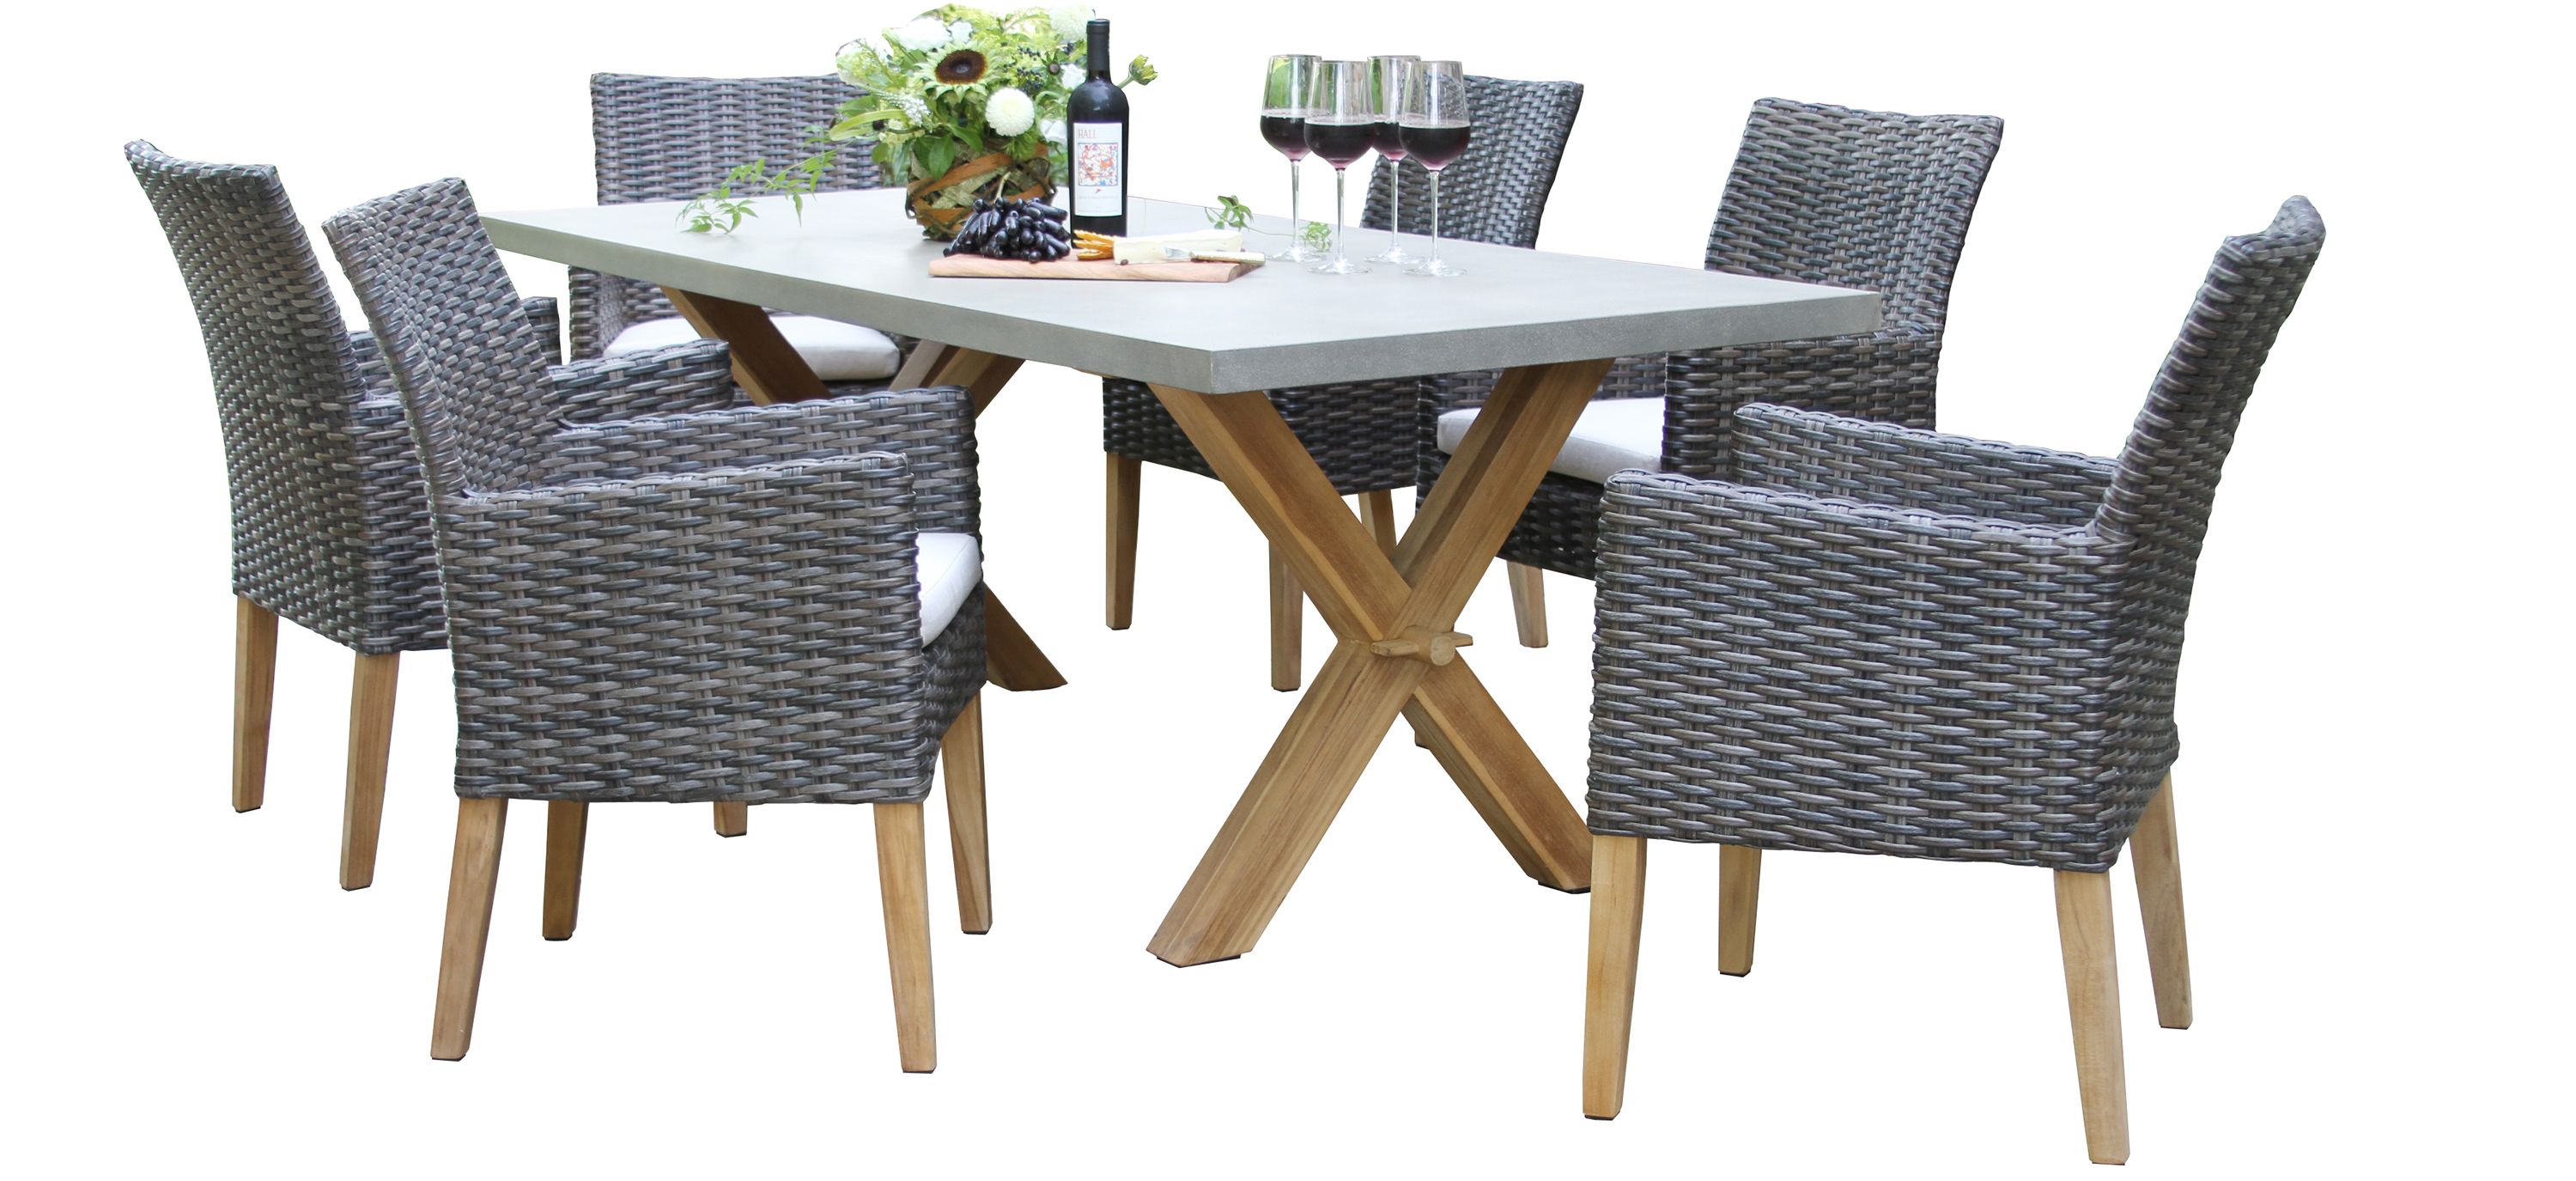 Cagle Outdoor 7-pc Table Set